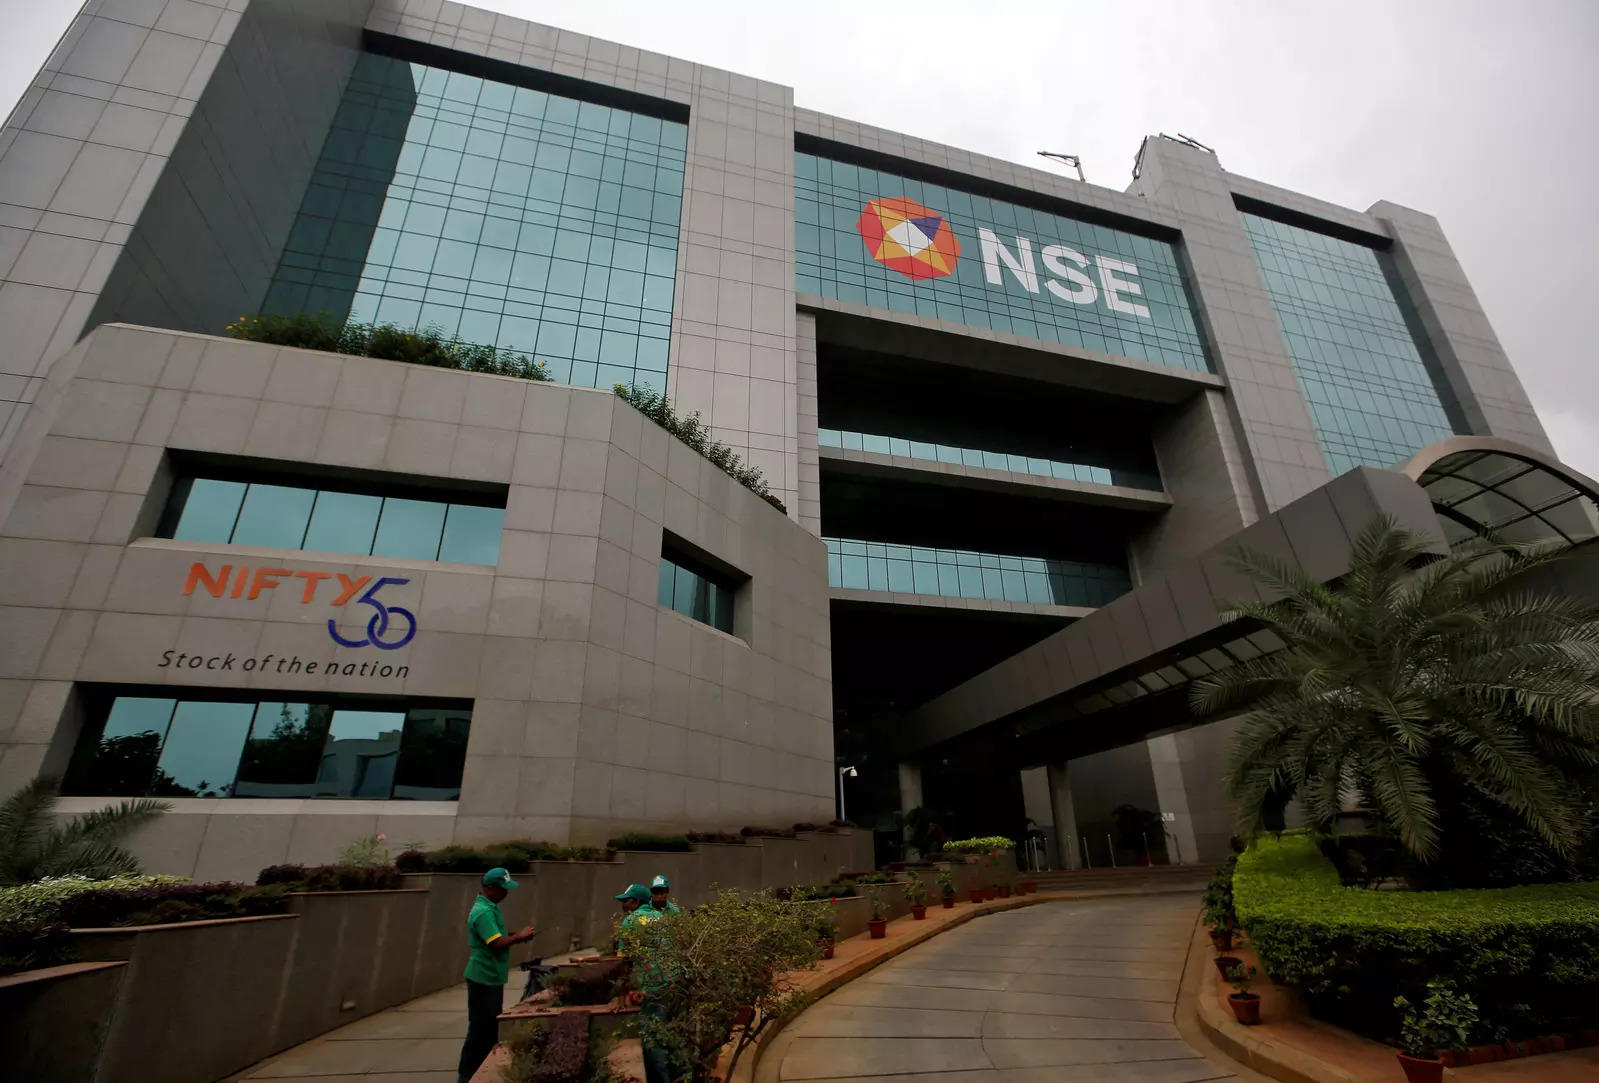 Nifty, Sensex open with lacklustre gains on June F&O expiry day